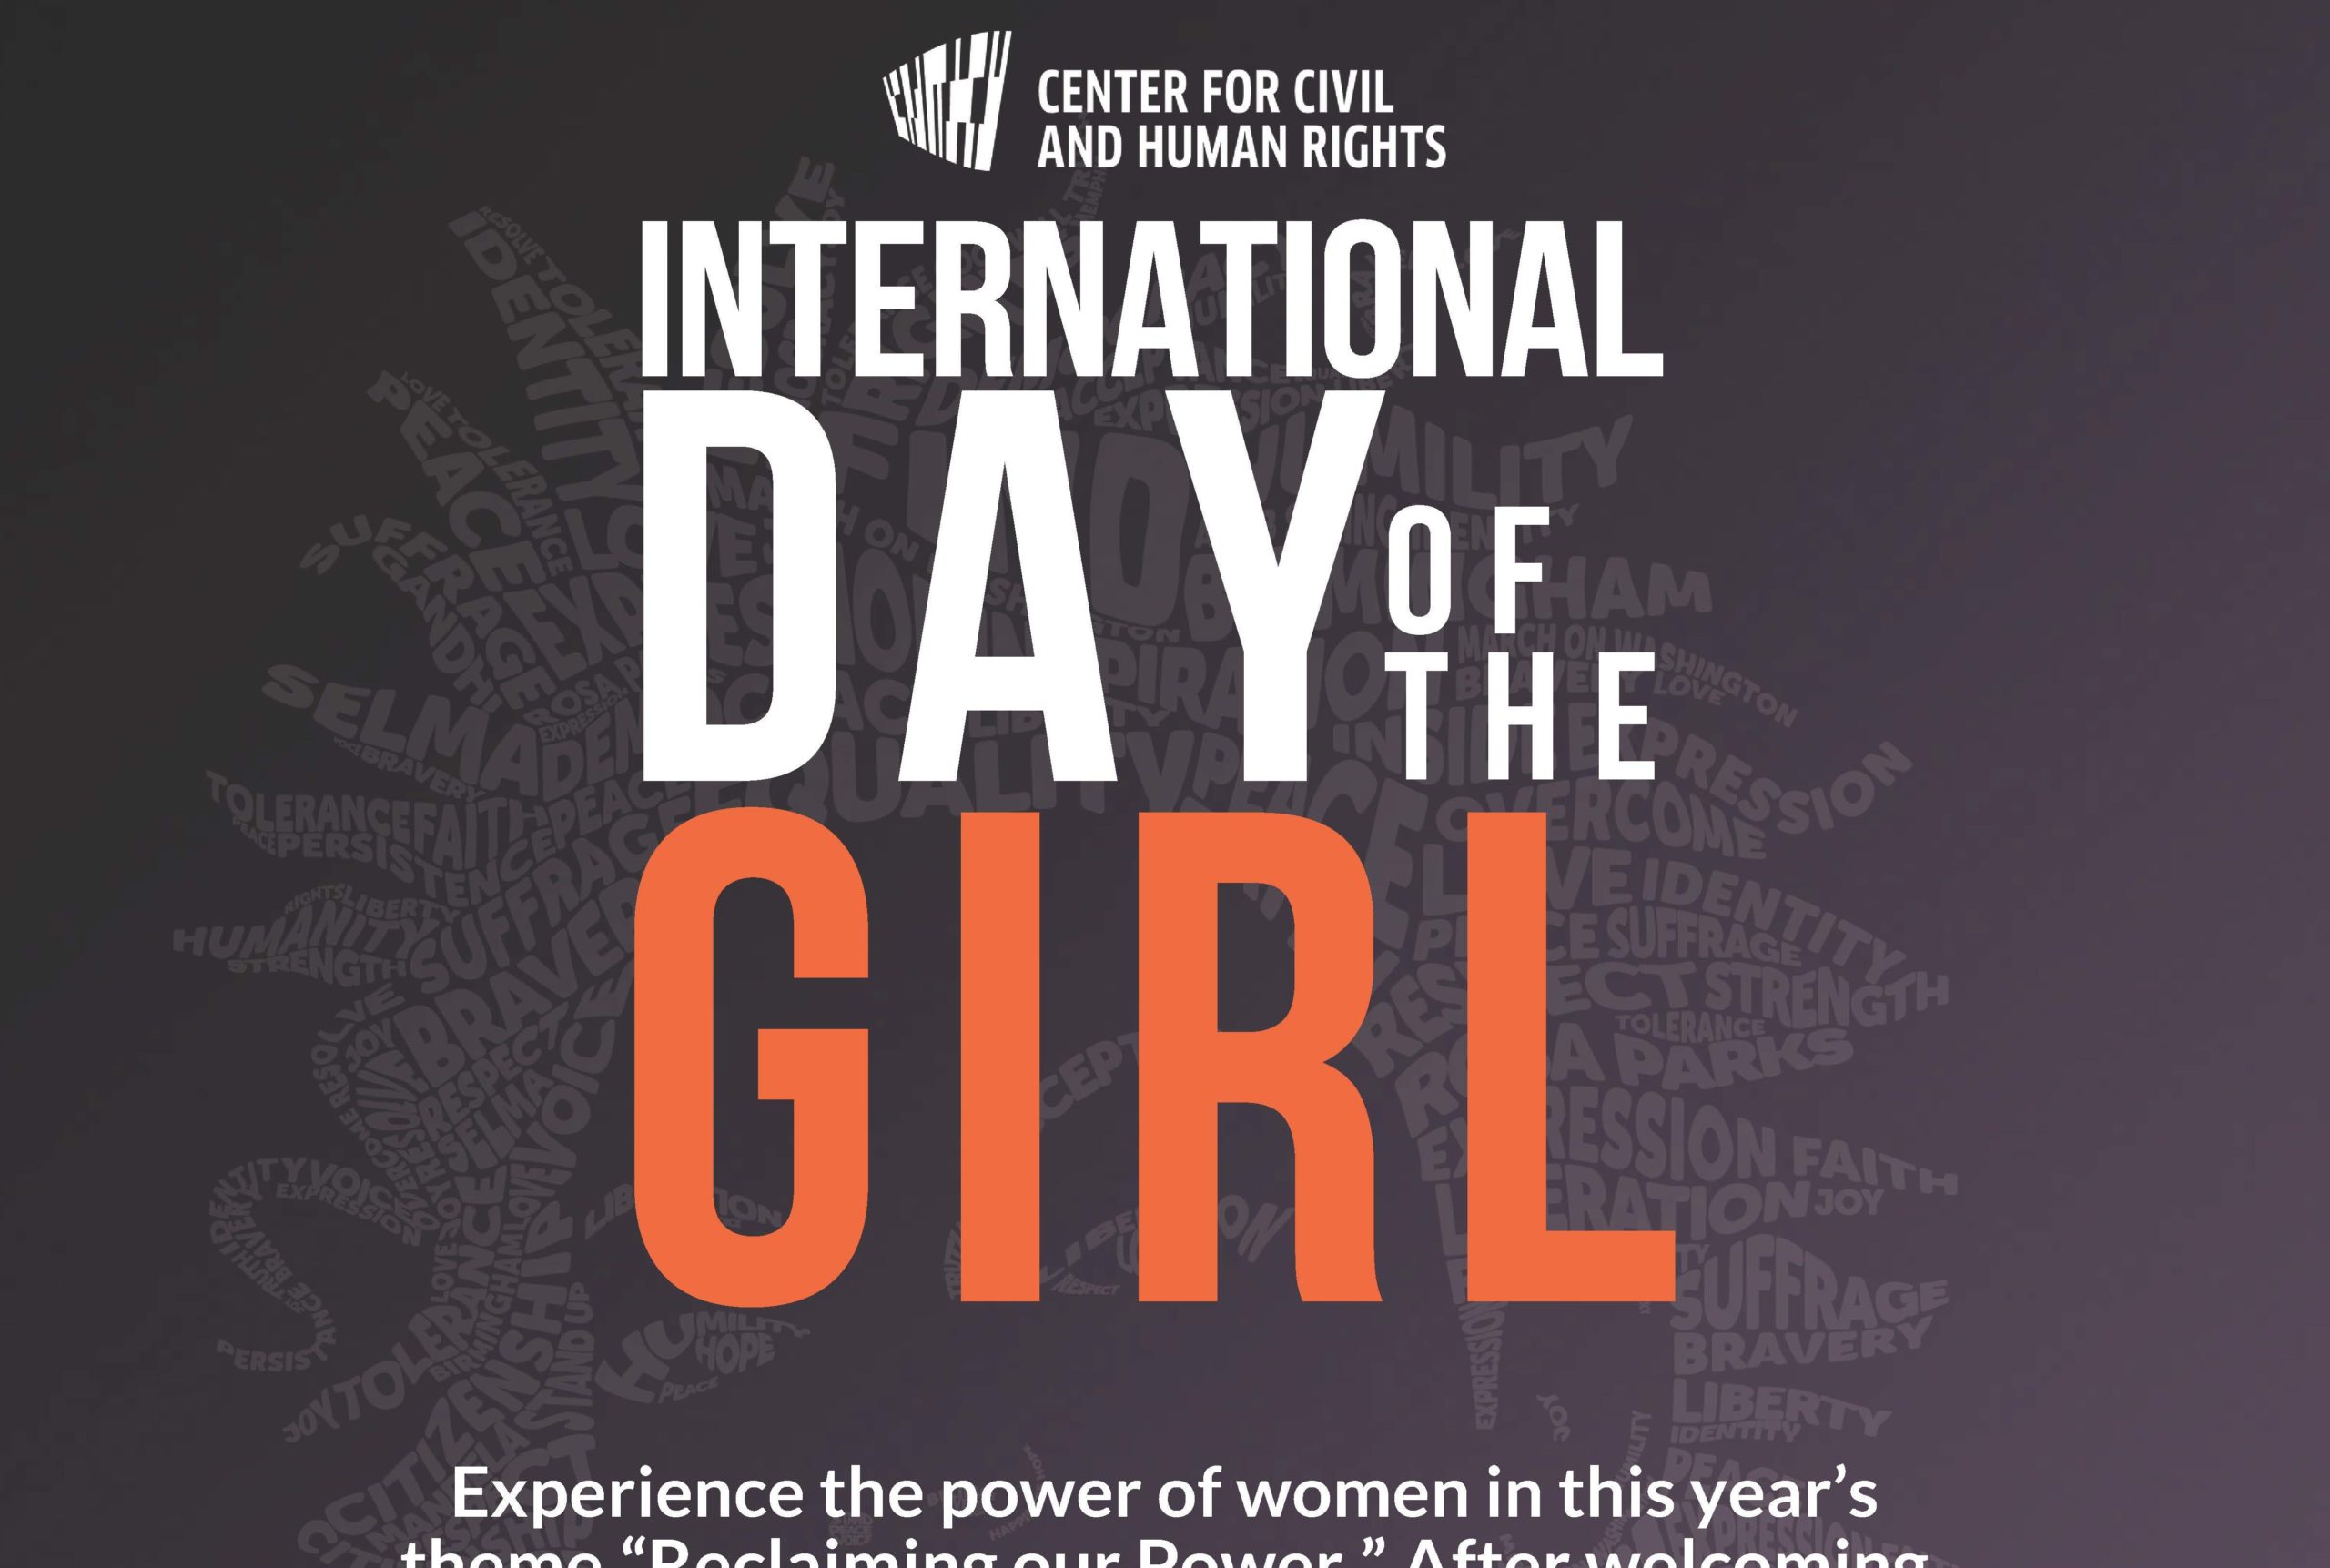 2018-international-day-of-the-girl-national-center-for-civil-and